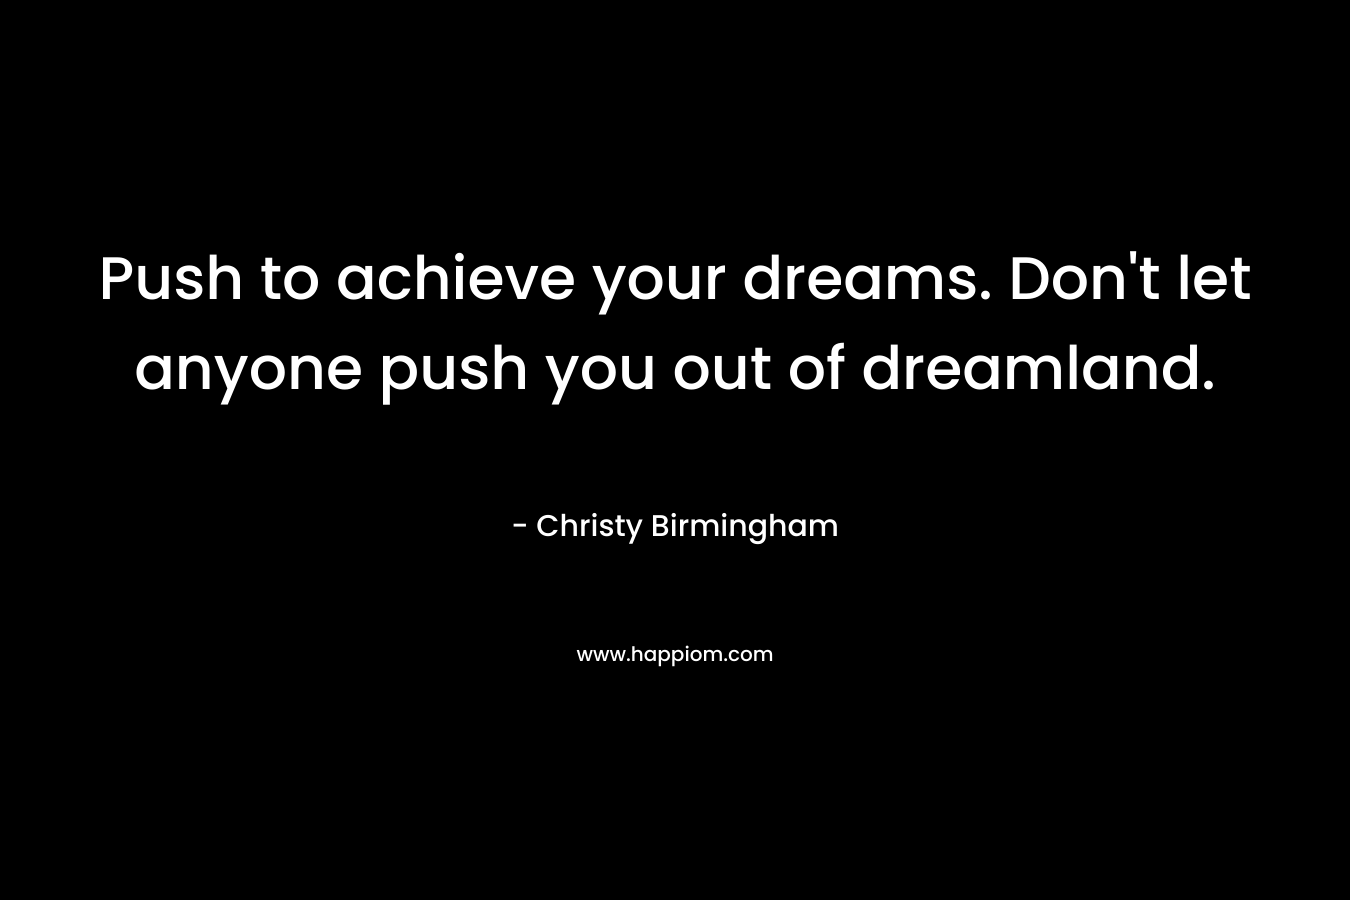 Push to achieve your dreams. Don't let anyone push you out of dreamland.